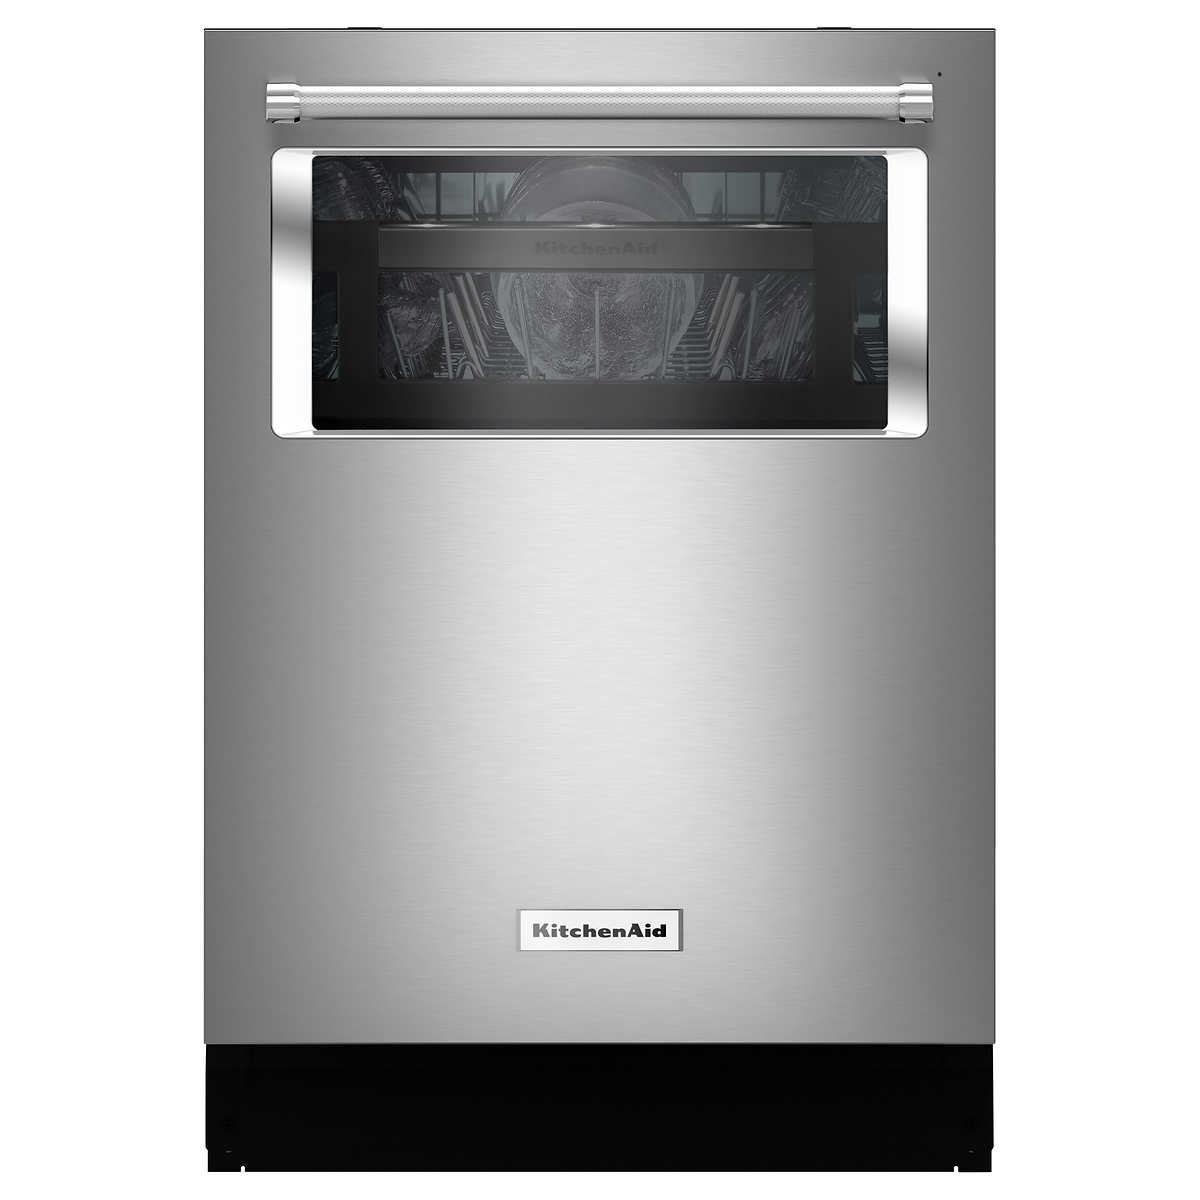 Kitchenaid Top Control Dishwasher With Third Level Rack And Dynamic Wash Arm In Stainless Steel